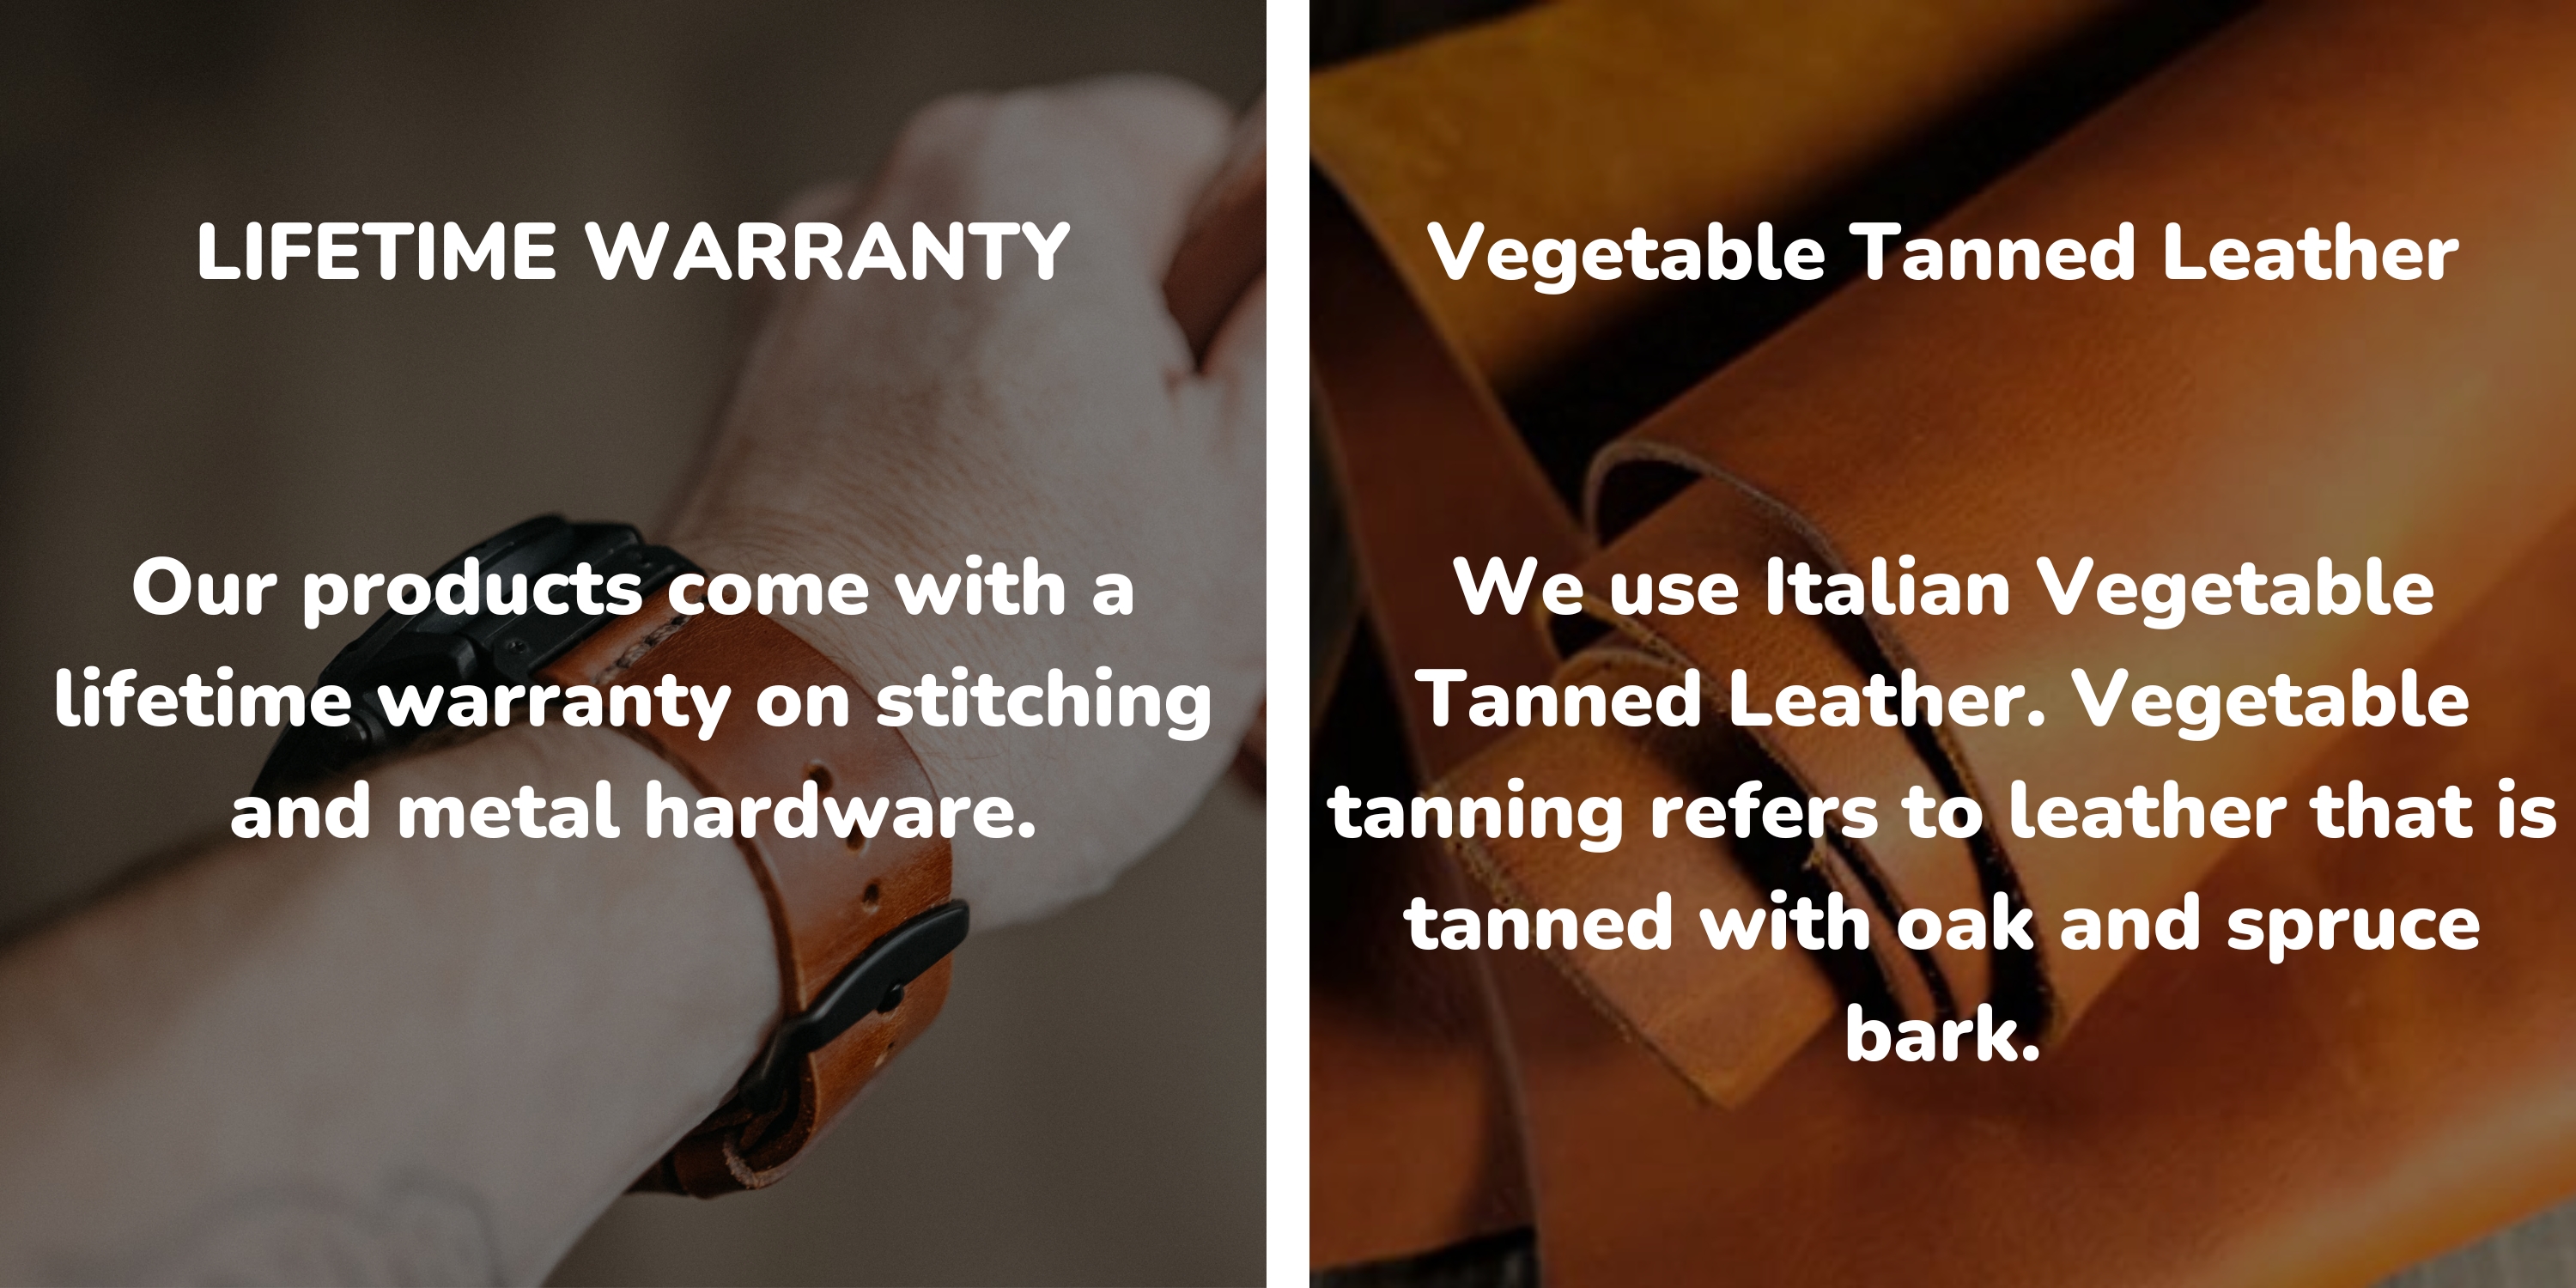 LIFETIME WARRANTY Our products come with a lifetime warranty on stitching and metal hardware.